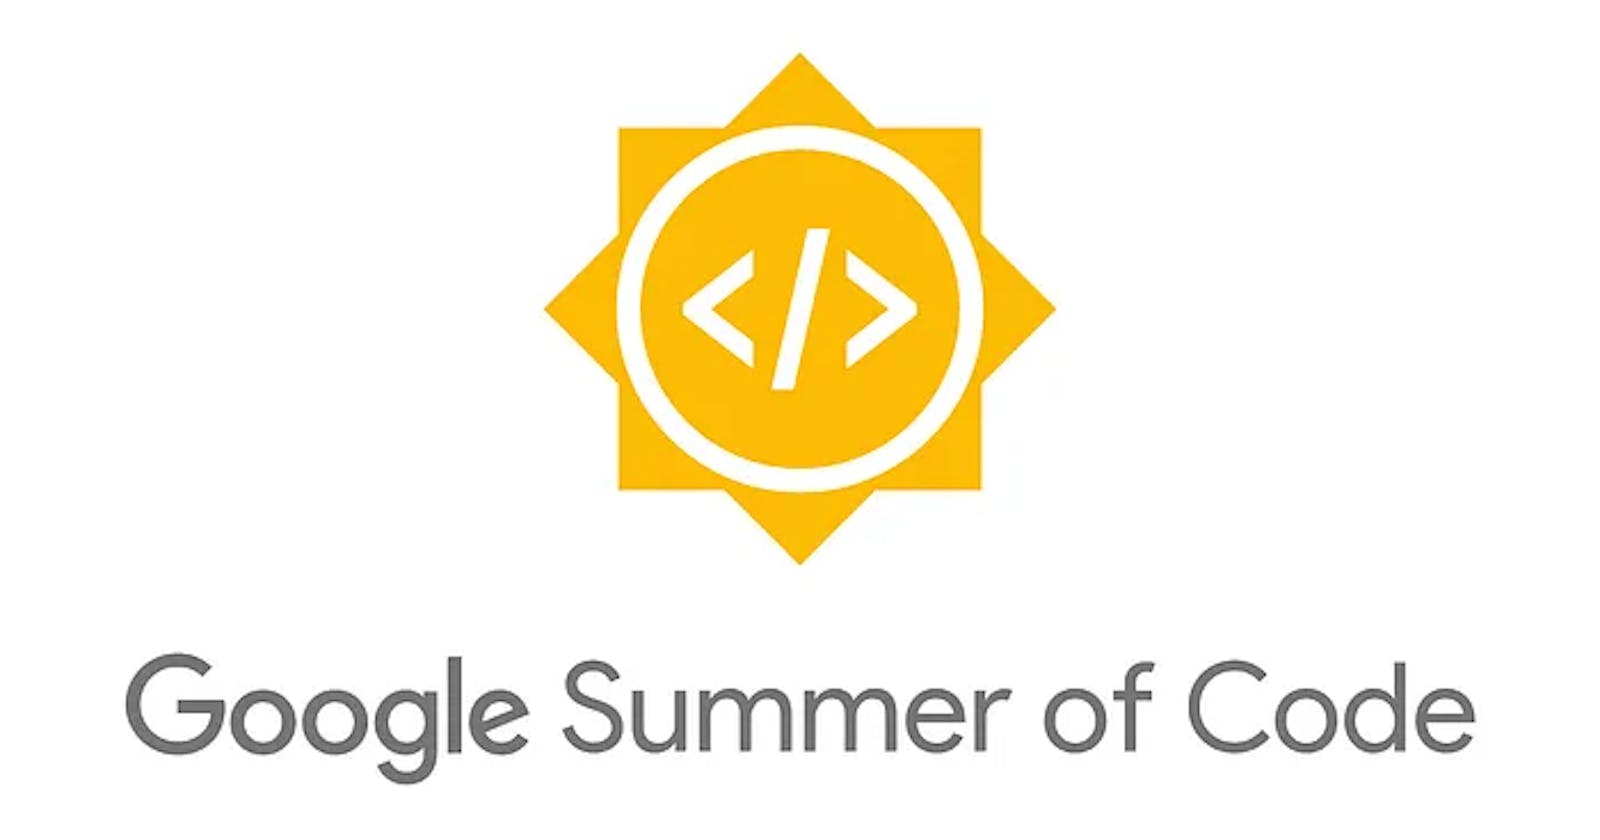 Getting started with Google Summer of Code (GSoC)